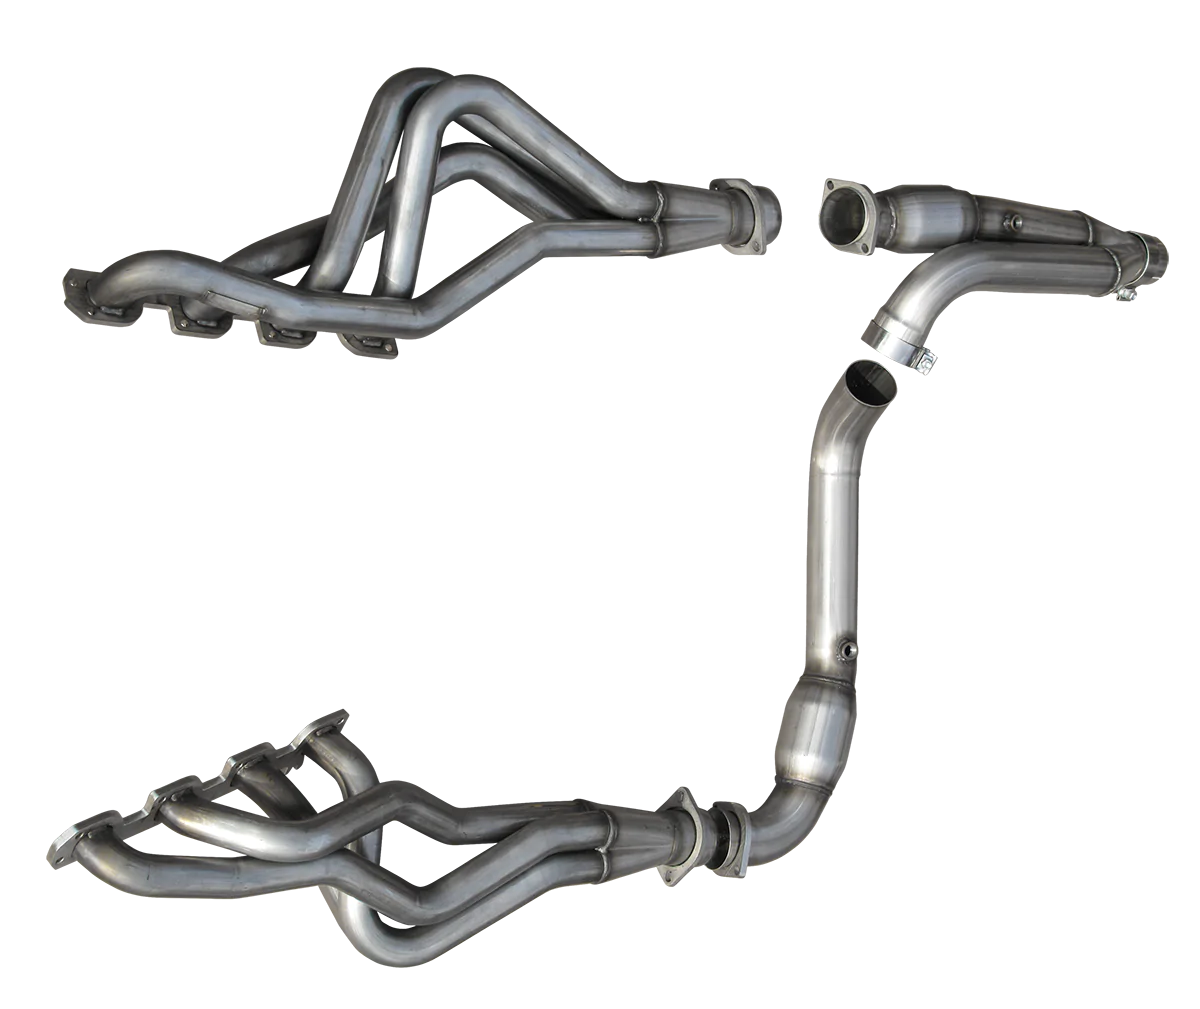 Ram 1500 (6-speed) 2009-2018 American Racing Long Tube Headers (with cats)